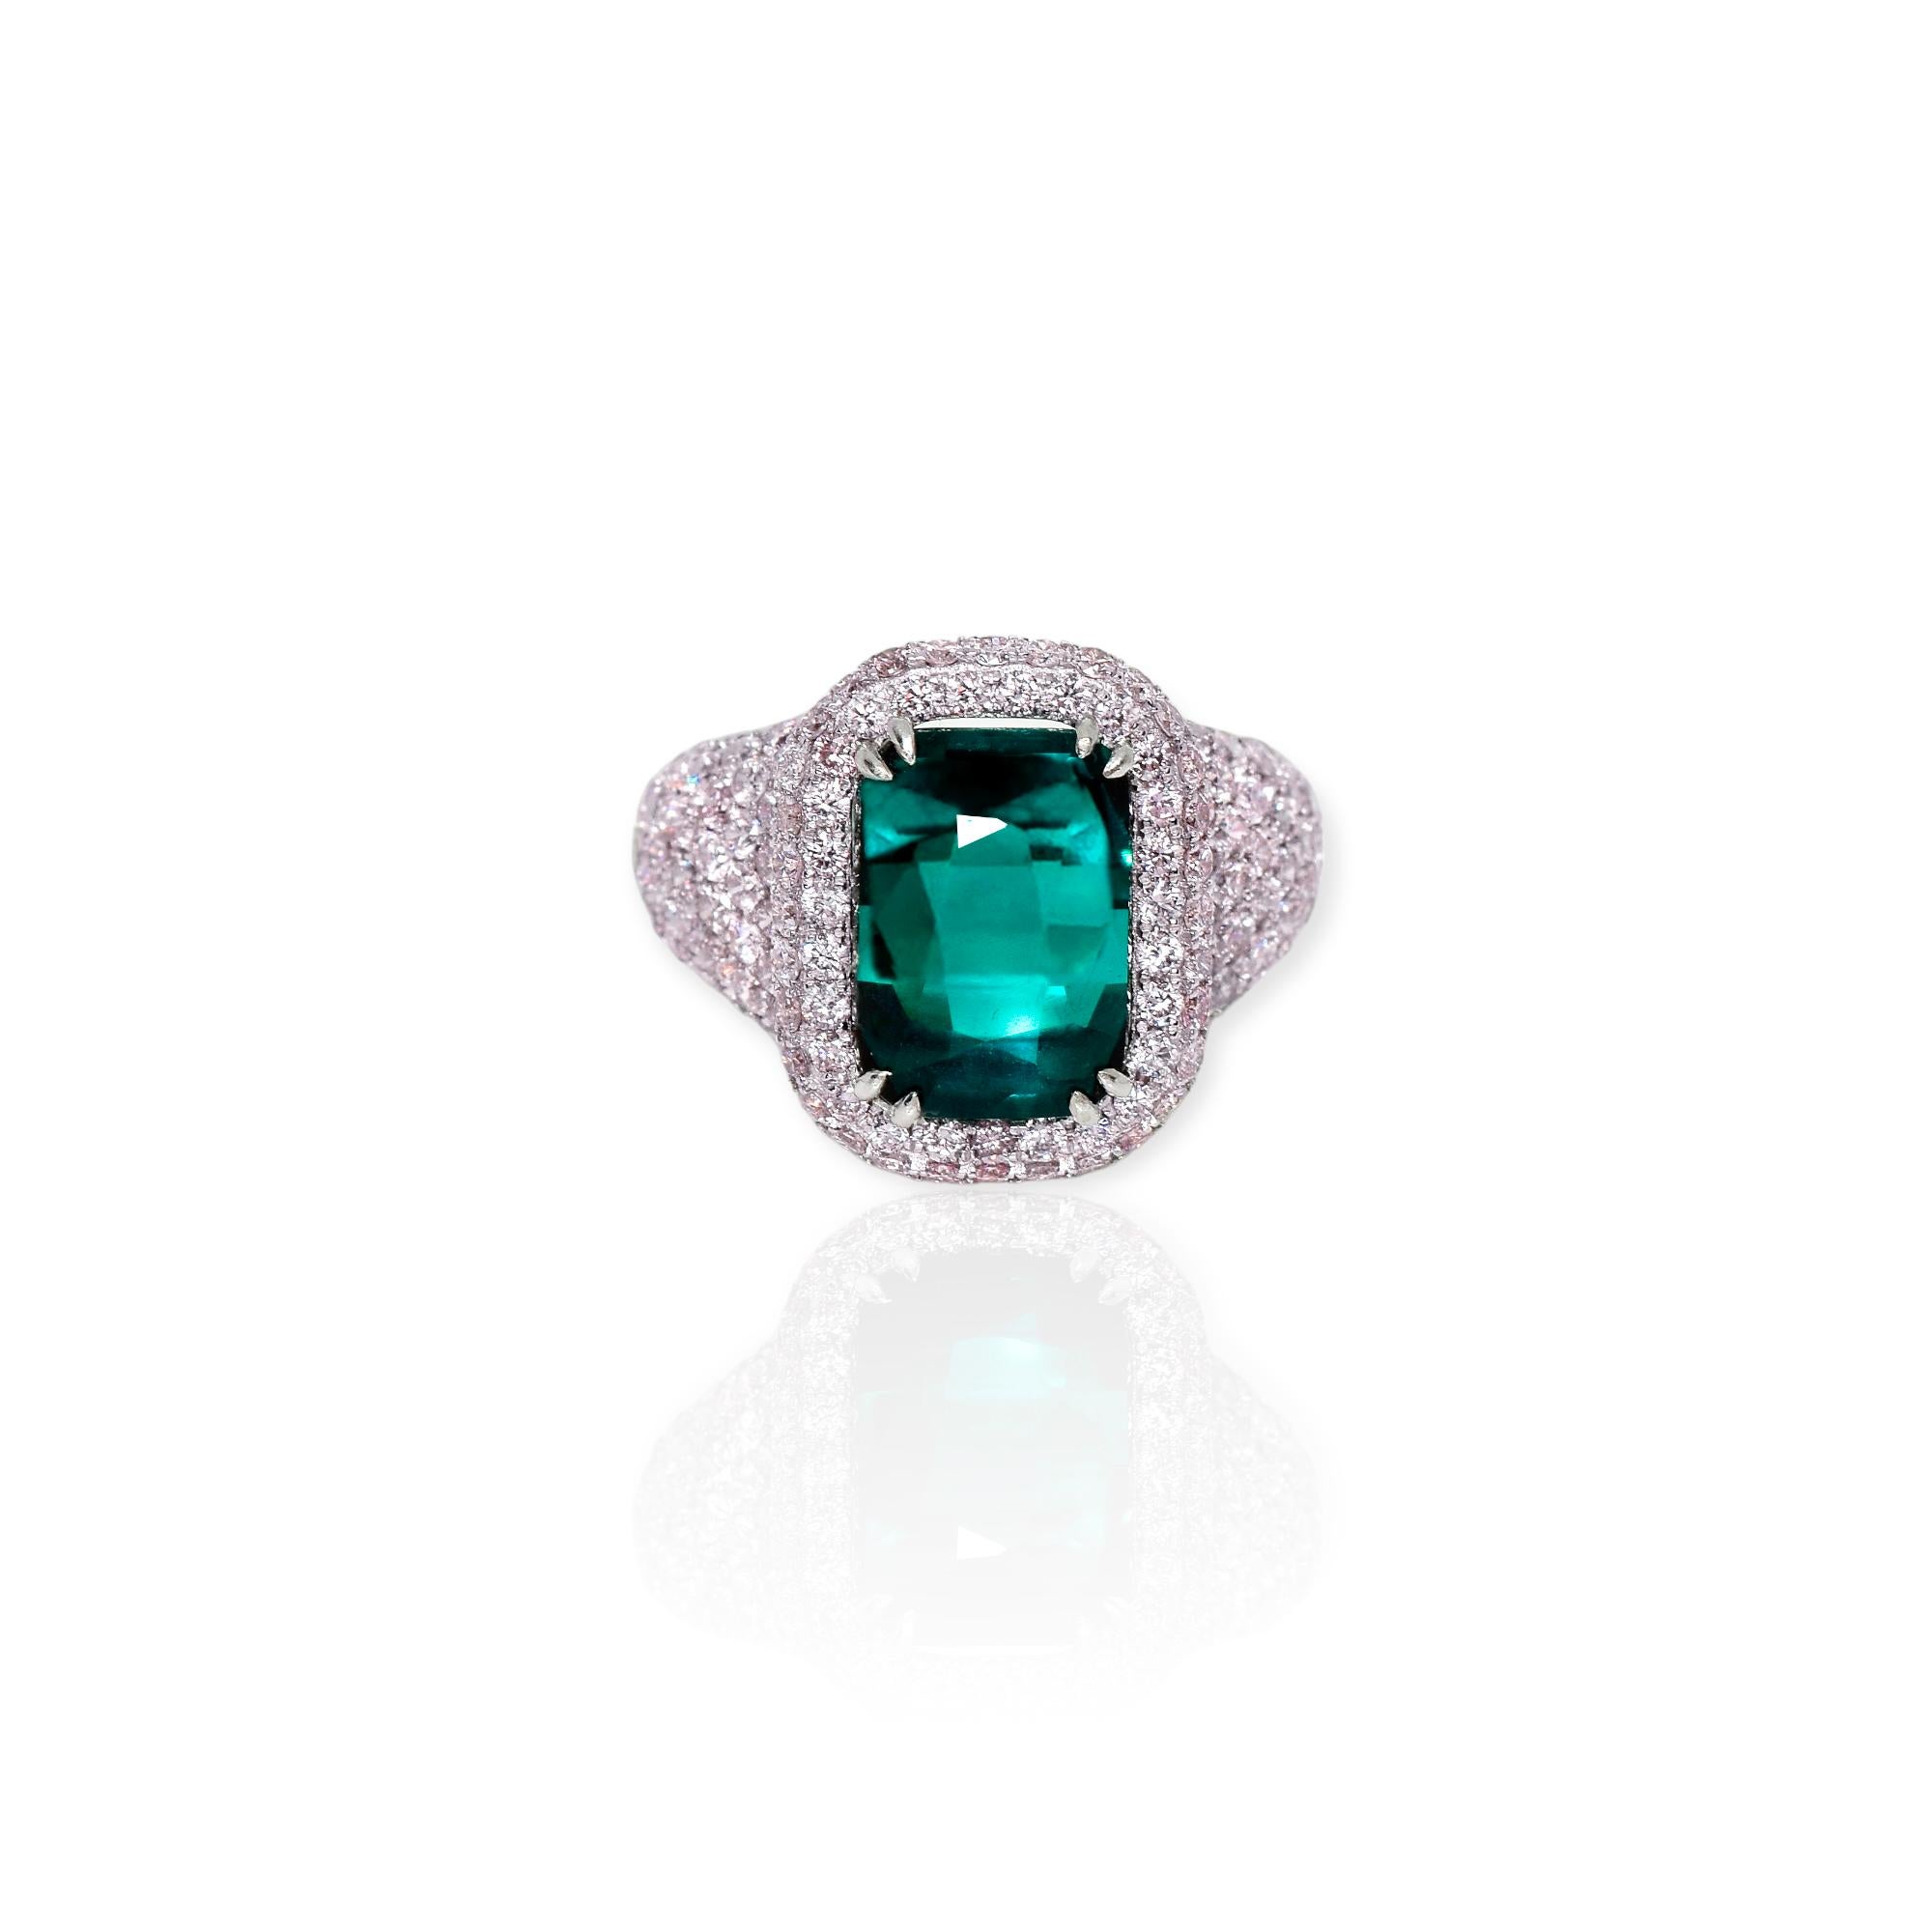 *GIA 18K 6.26 Ct Indicolite Tourmaline and 2.88 Ct Pink Diamonds Engagement Ring*

GIA-certified natural Indicolite Tourmaline weighing 6.26 ct is set on an 18K white gold luxury fashion band with natural pink color round brilliant cut diamonds